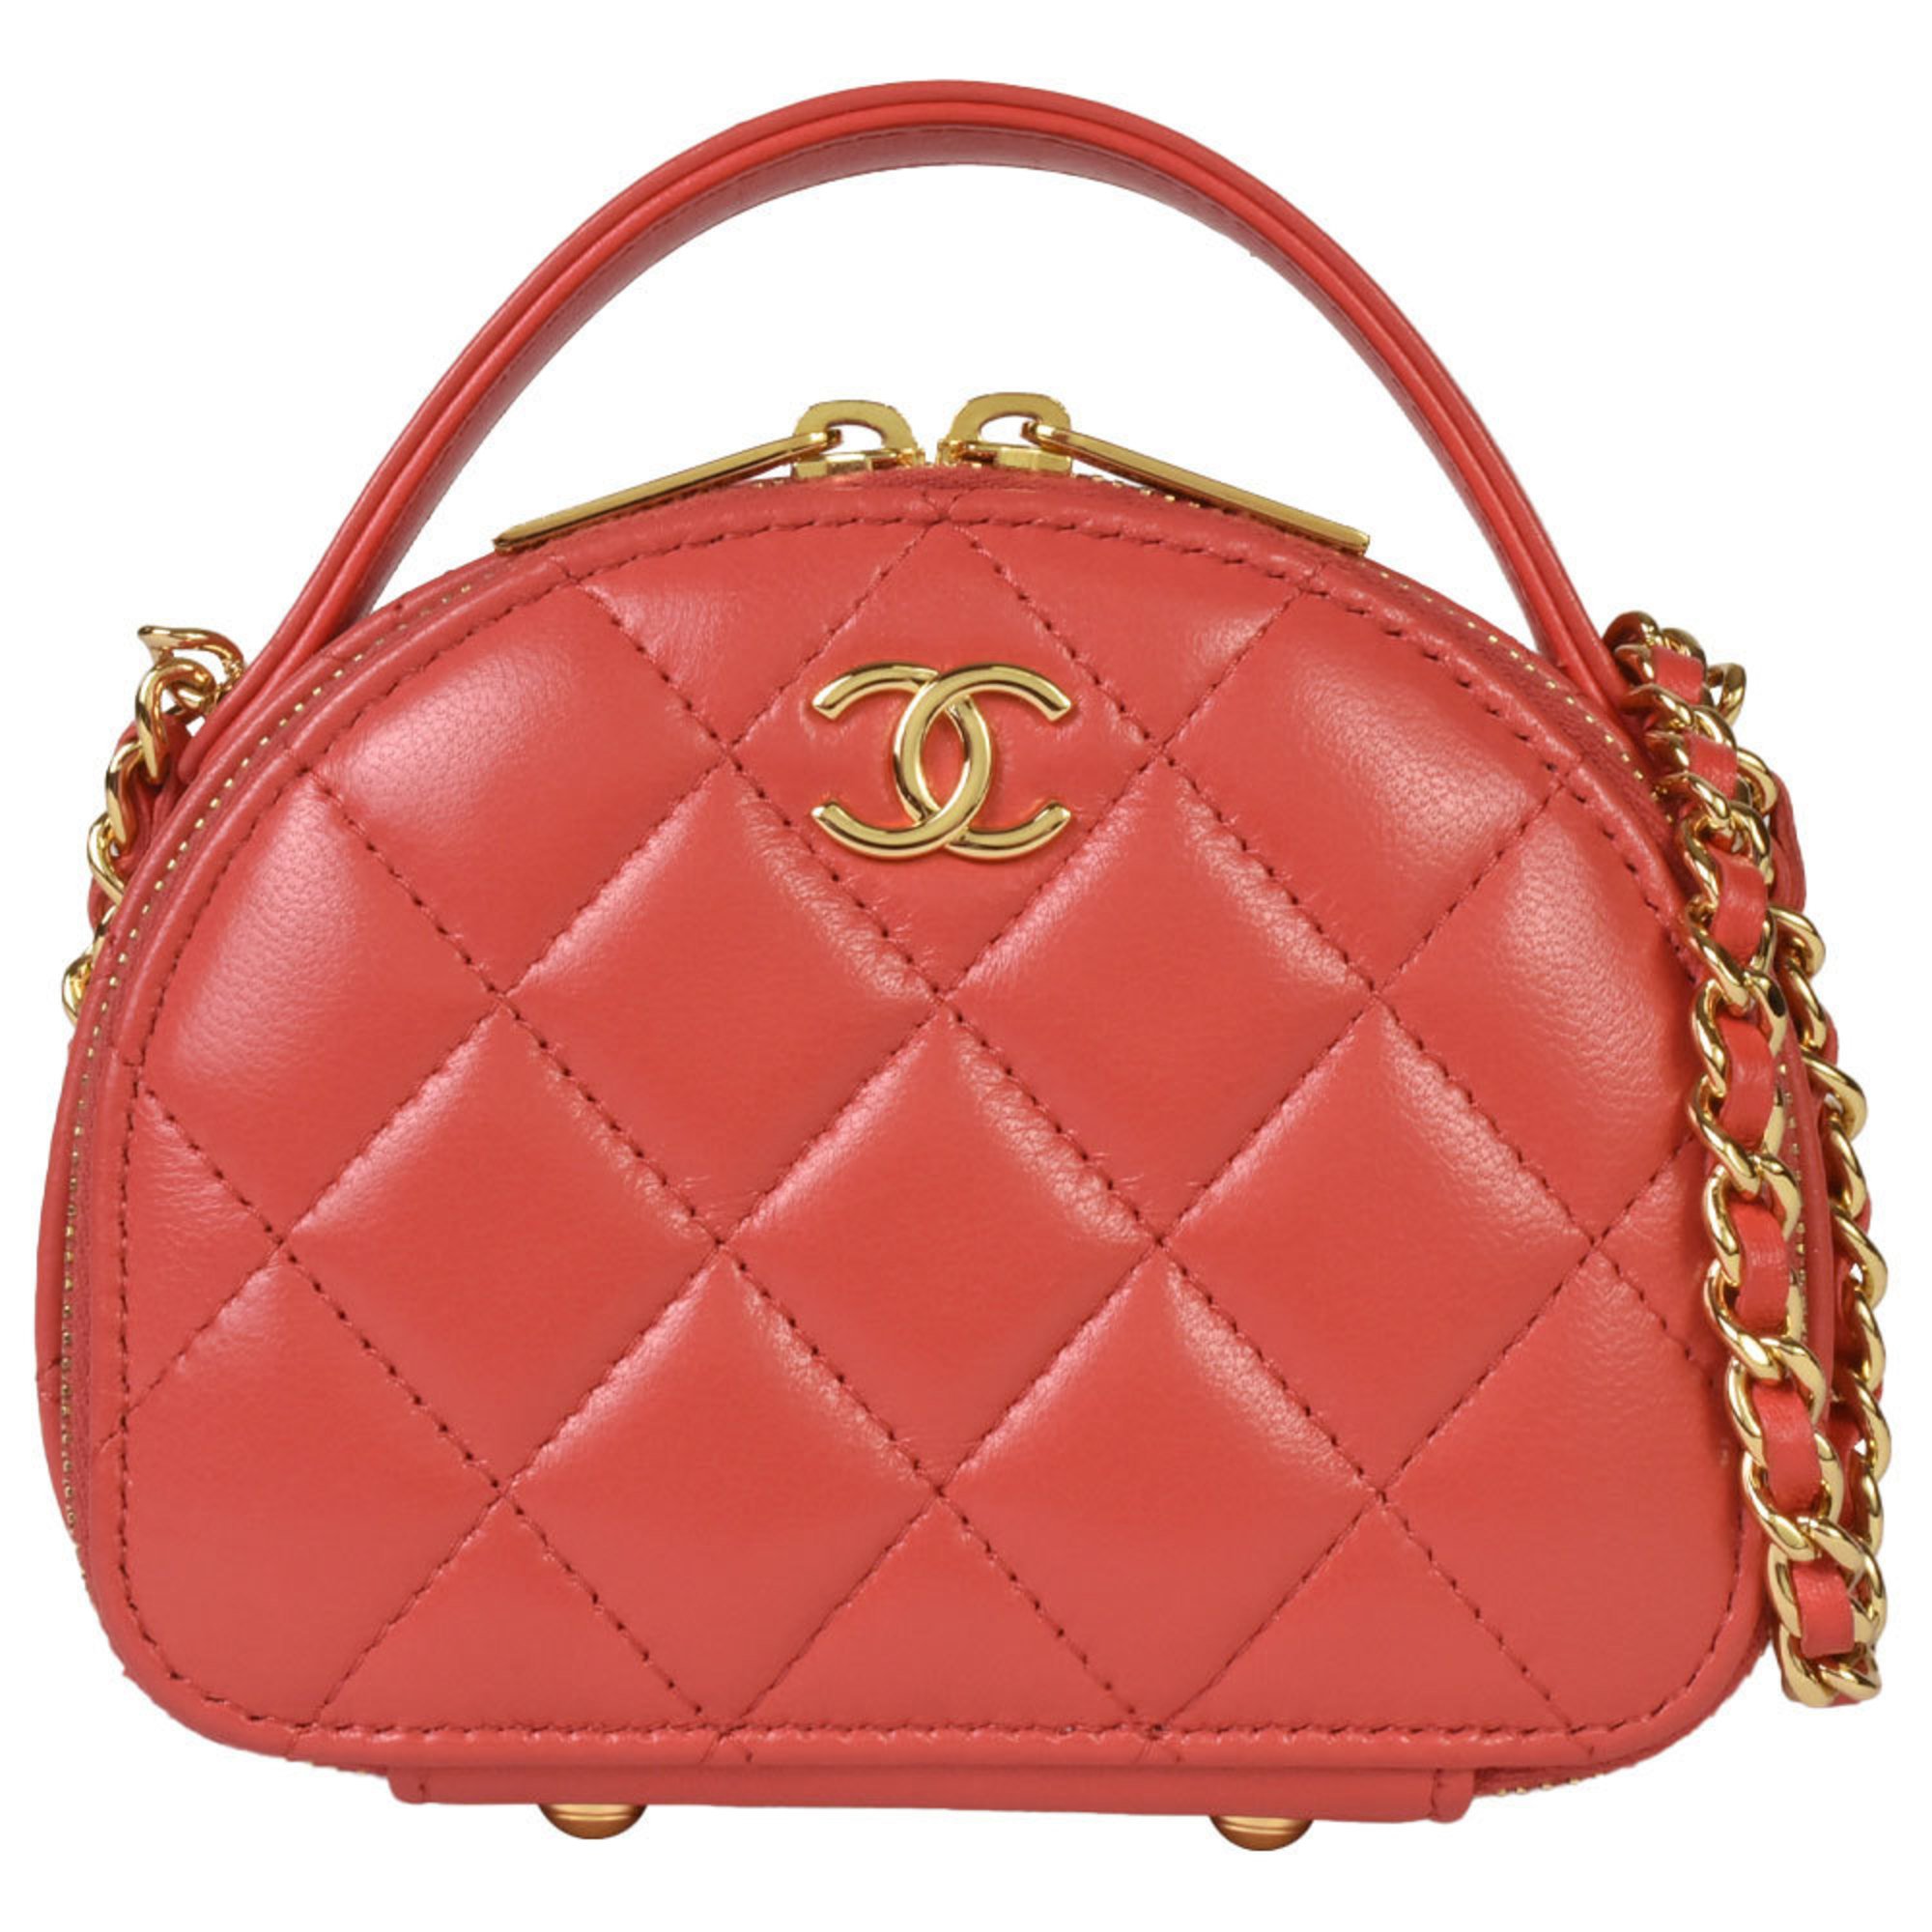 CHANEL Coco Mark Chain Clutch Shoulder Bag Random Serial (Manufactured after 2021) Red Lambskin AP3088